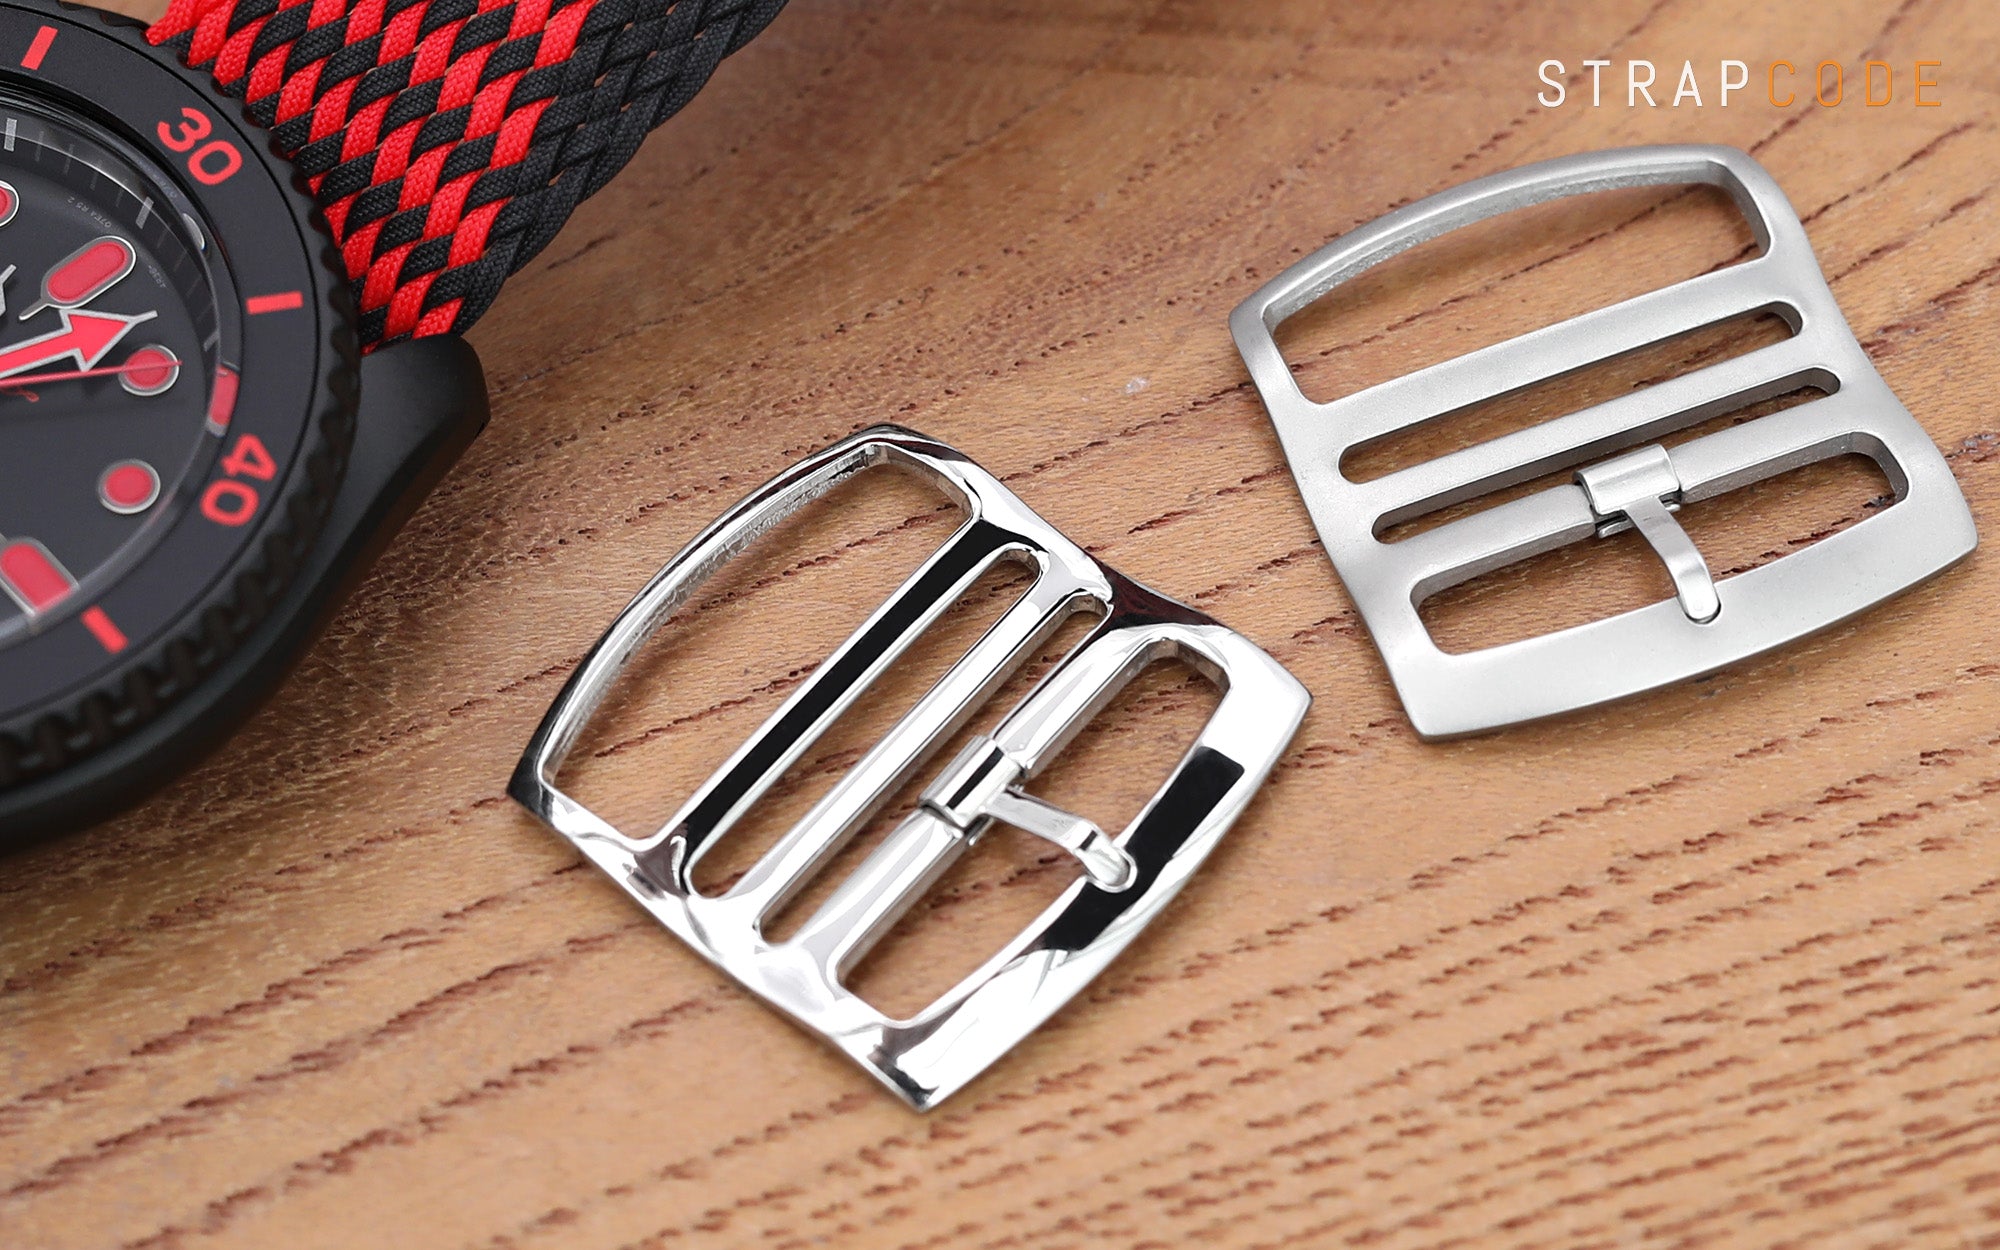 Classy watch Buckle for Perlon / Nylon watch band  by Strapcode